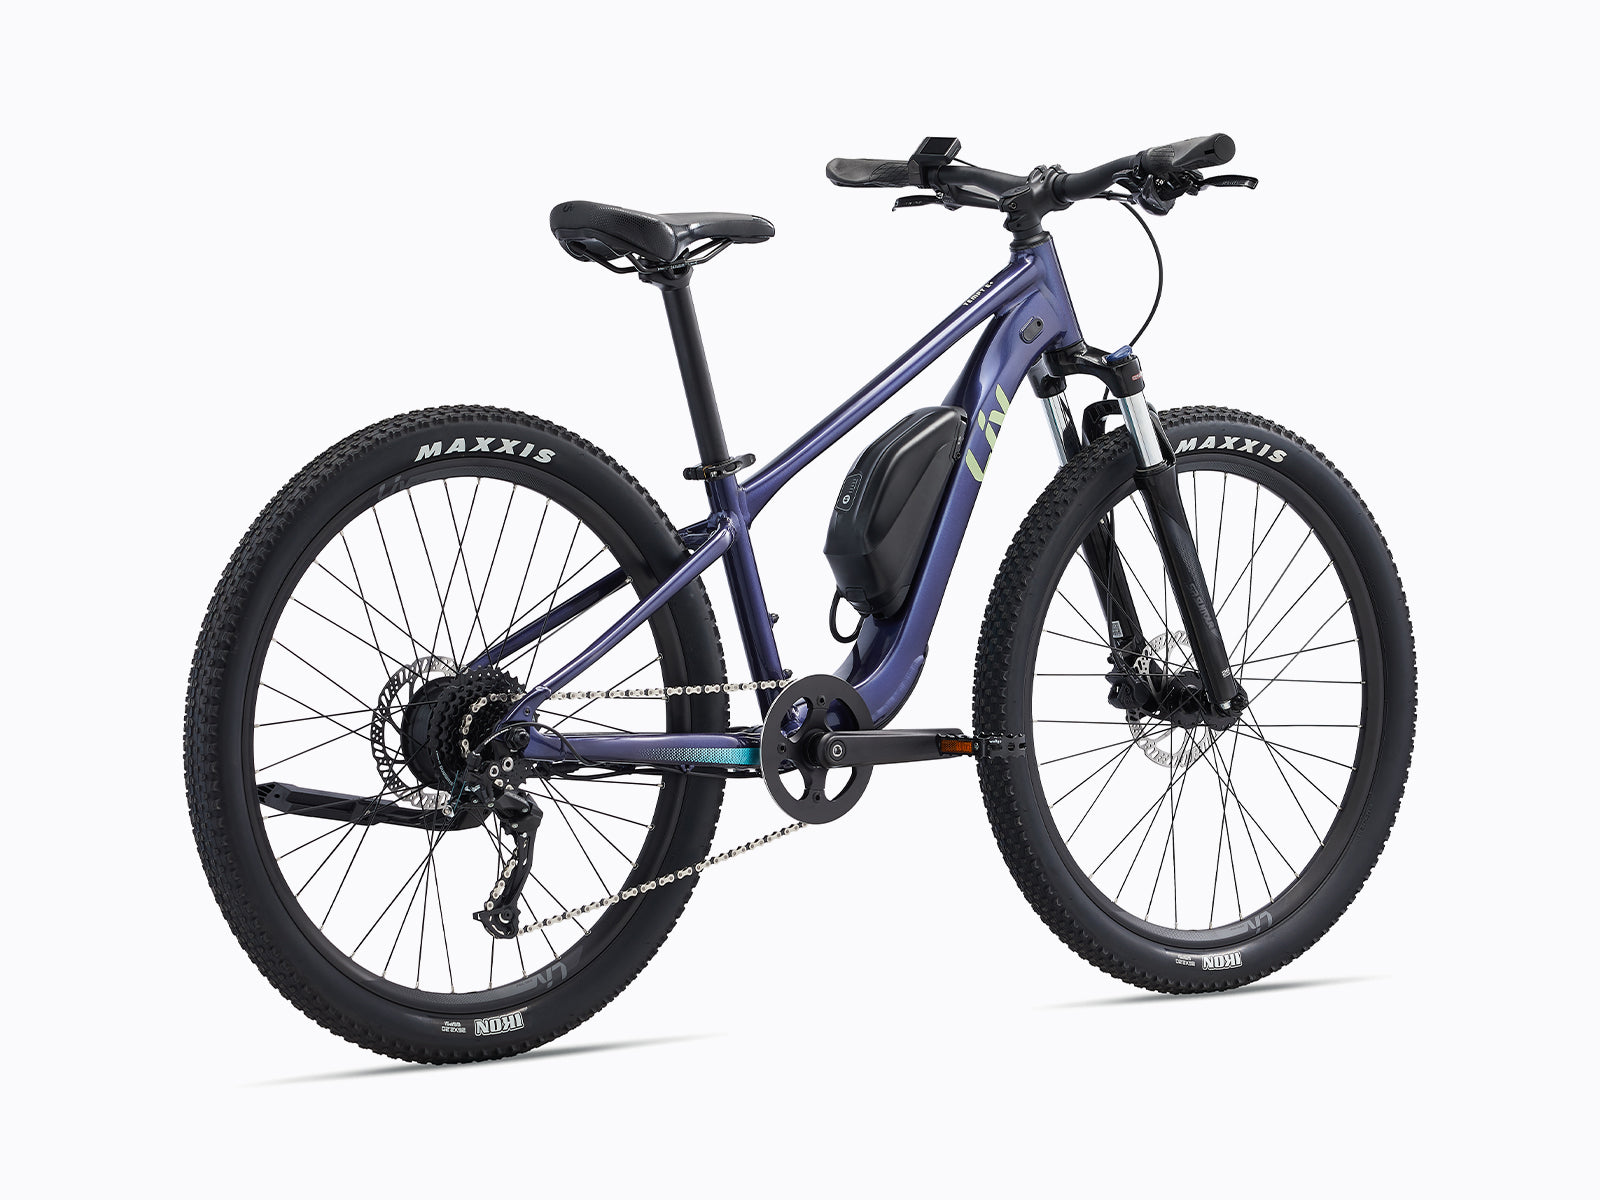 Image features a Liv tempt E junior 26, a kids bike by Giant. Sold by Giant Melbourne, a bike shop in Melbourne